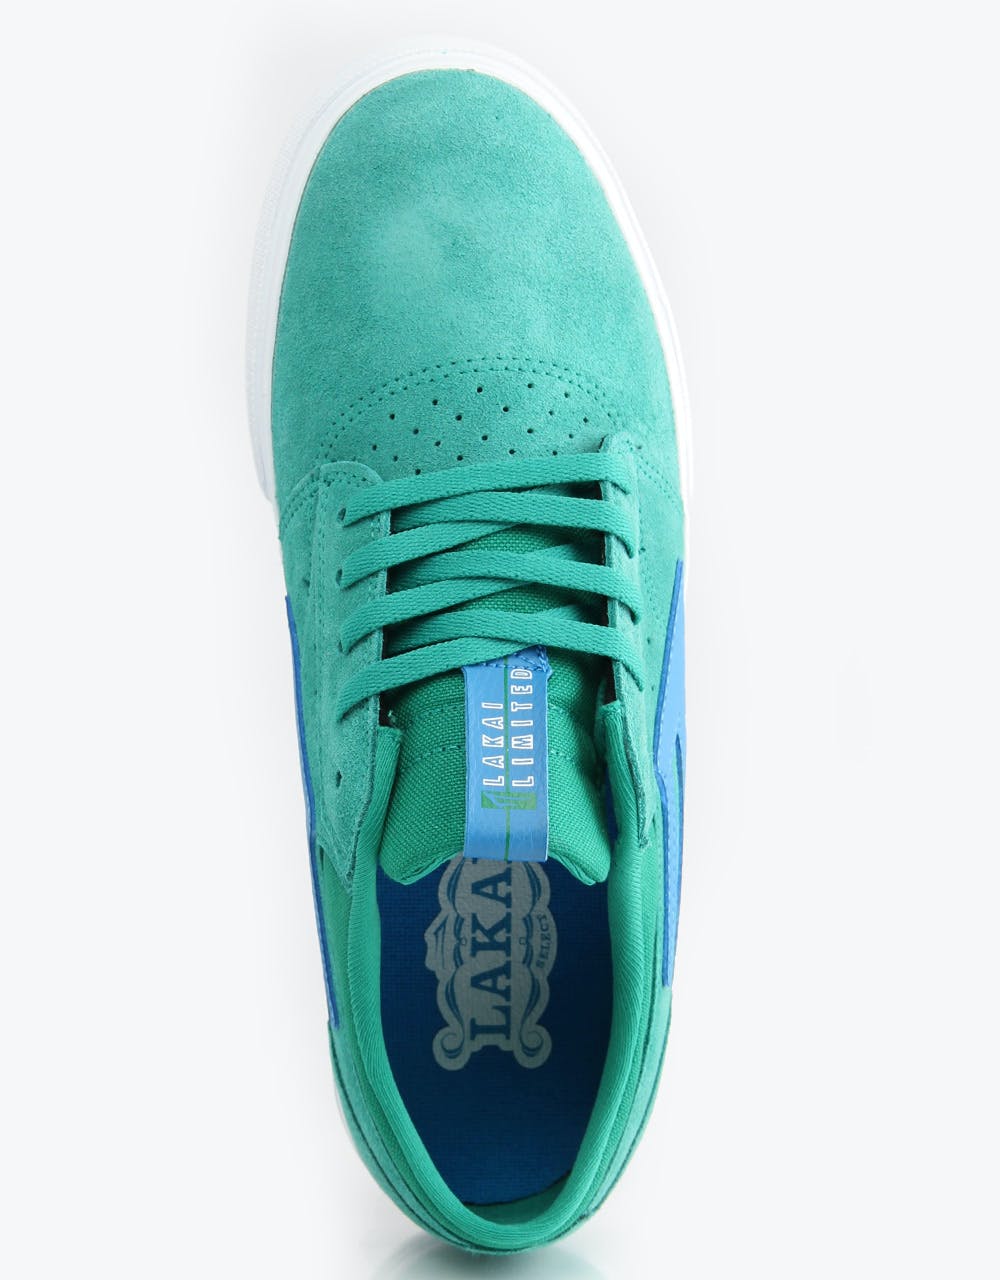 Lakai Griffin Skate Shoes - Green/Blue/Suede